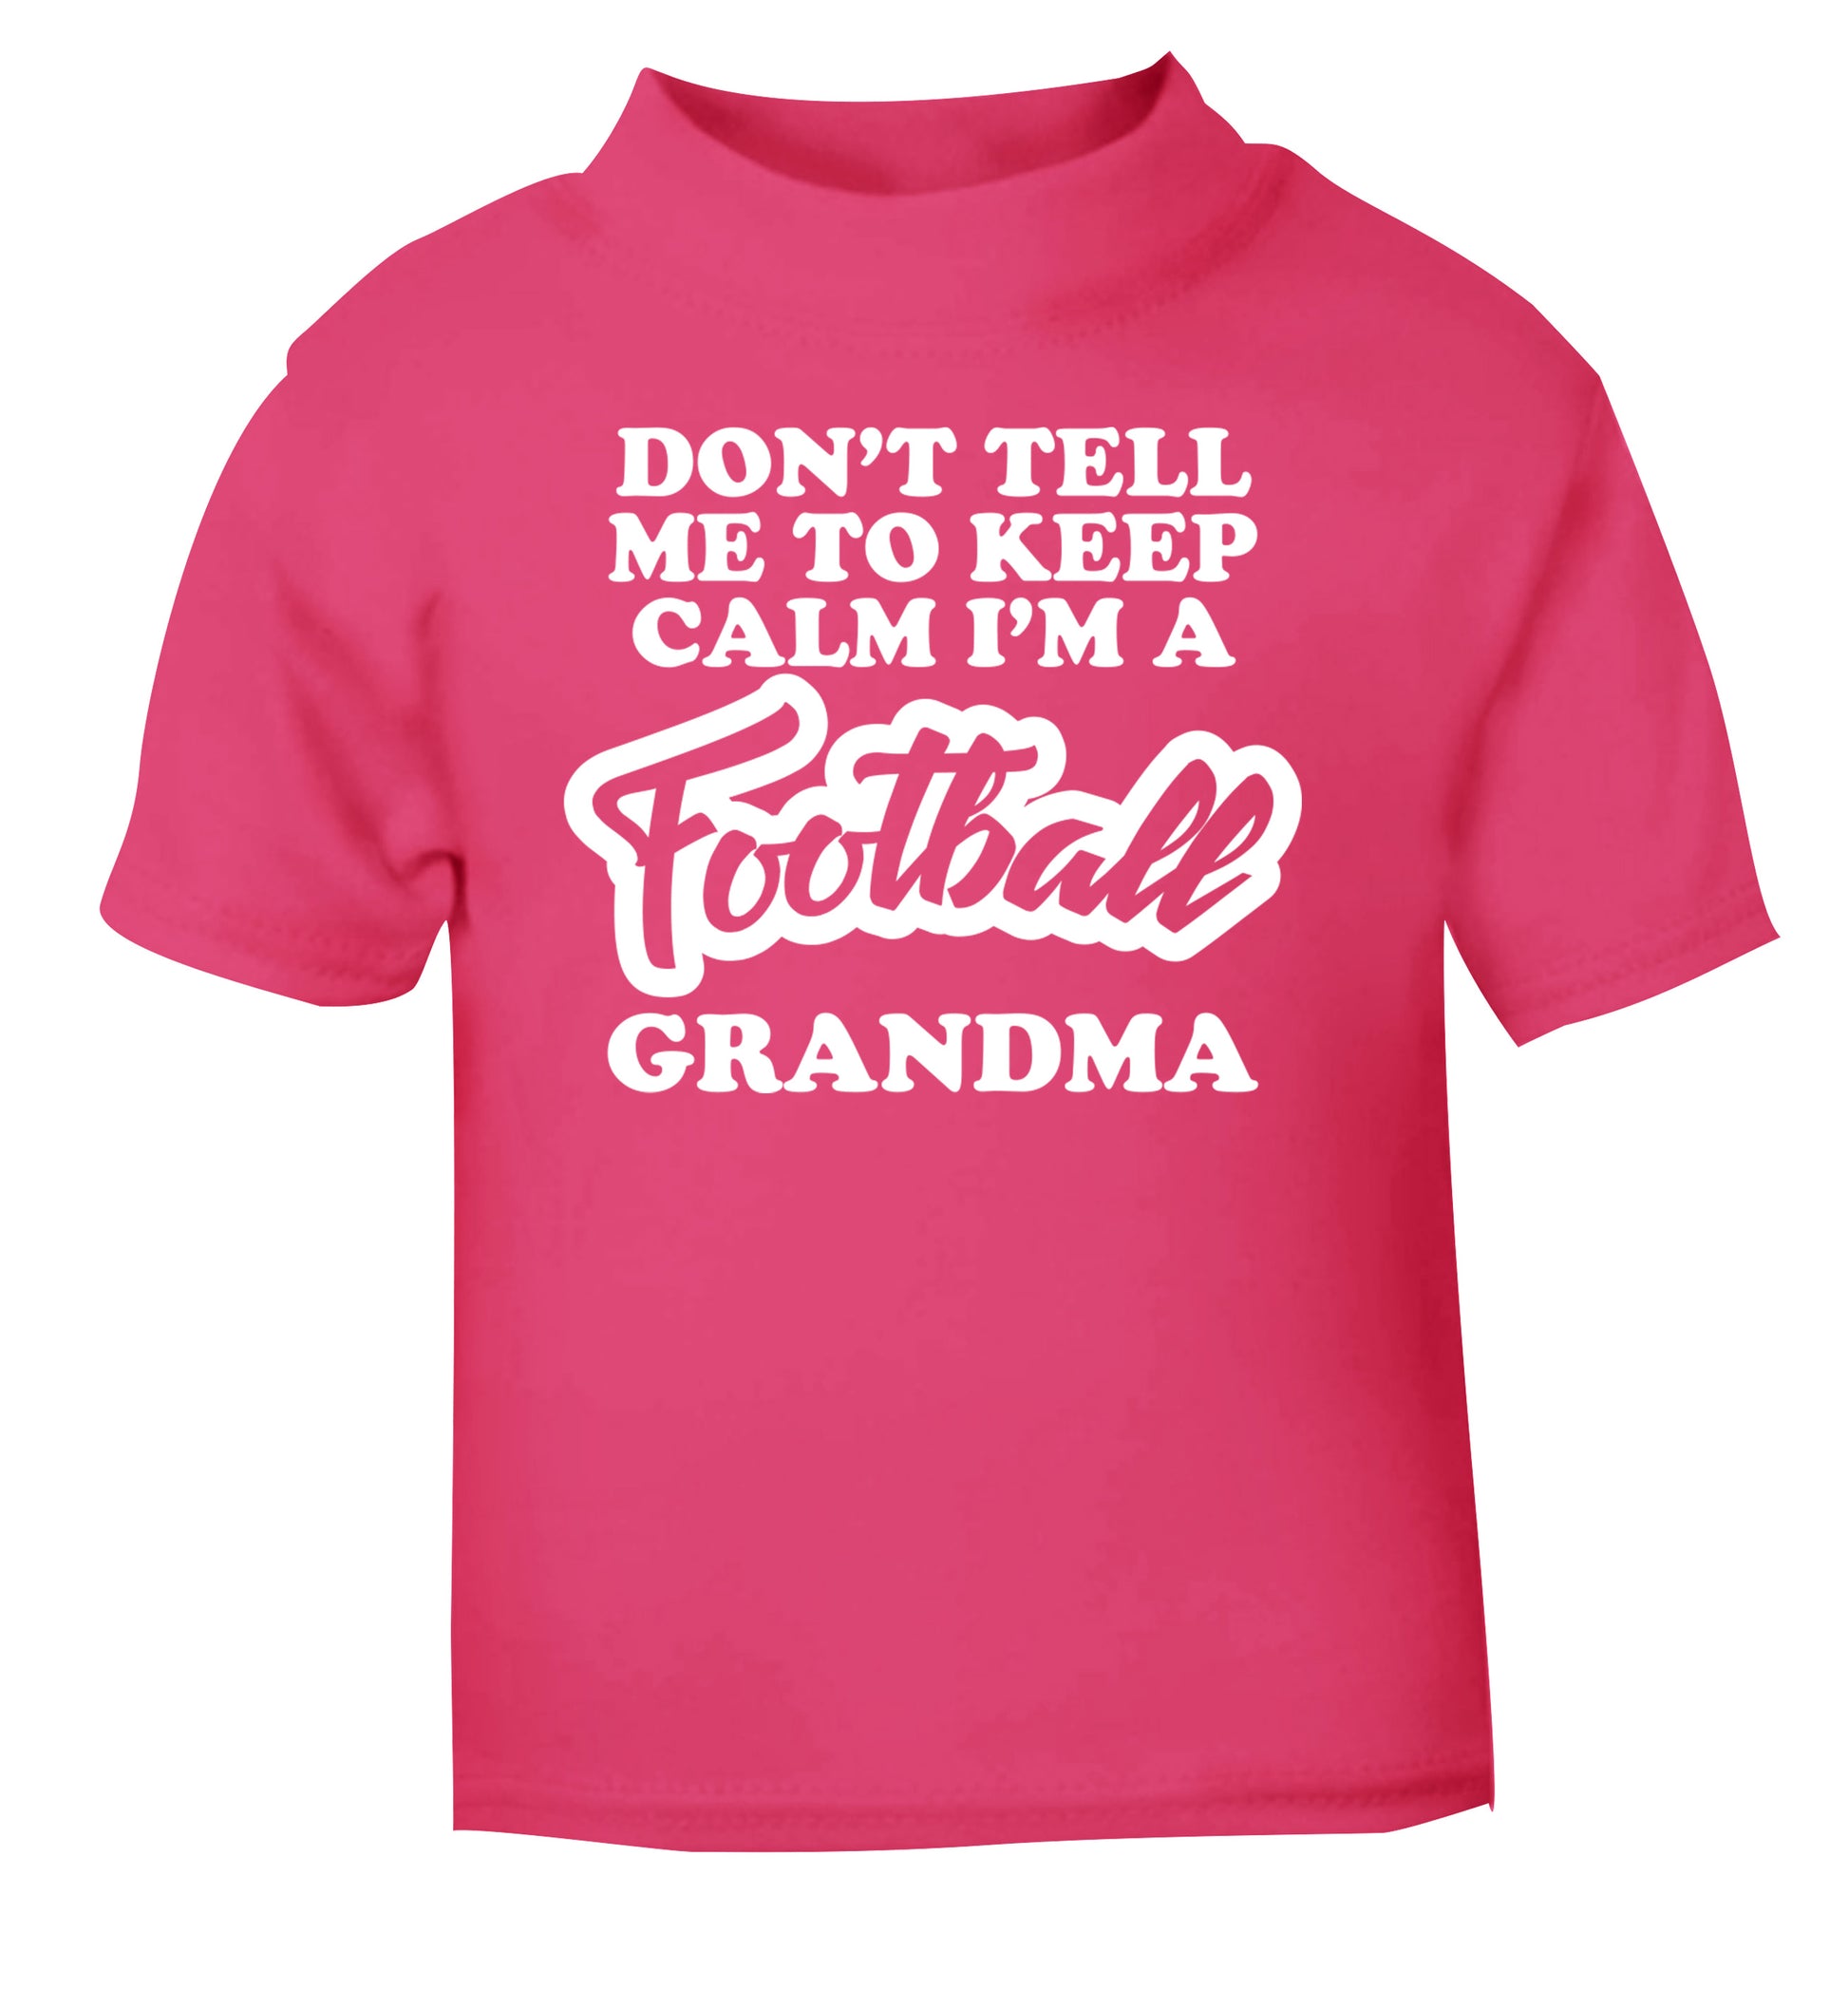 Don't tell me to keep calm I'm a football grandma pink Baby Toddler Tshirt 2 Years